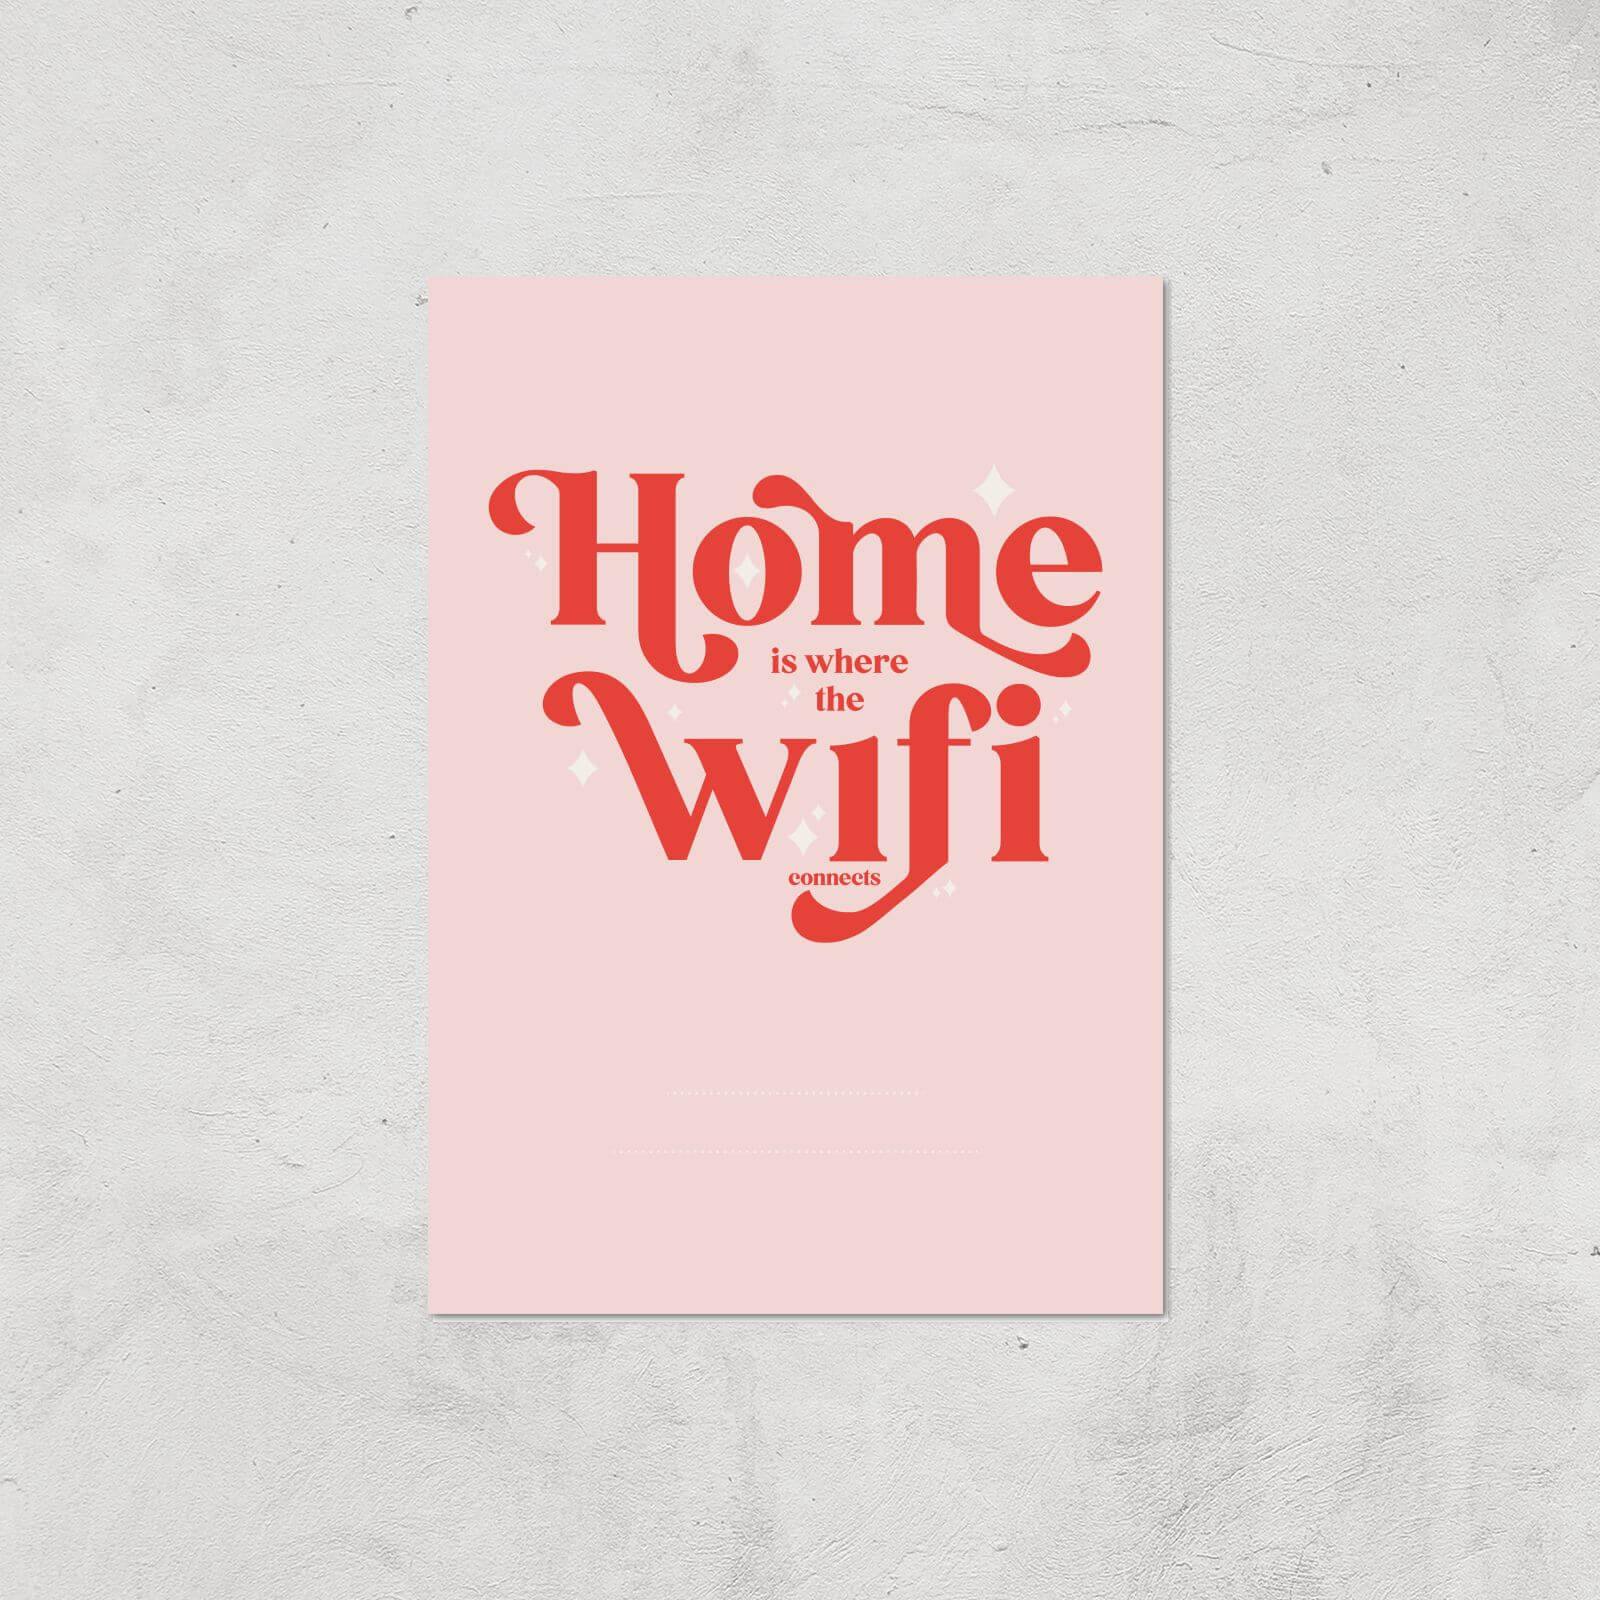 Hermione Chantal Light Home Is Where The Wifi Is Giclee Art Print - A3 - Print Only